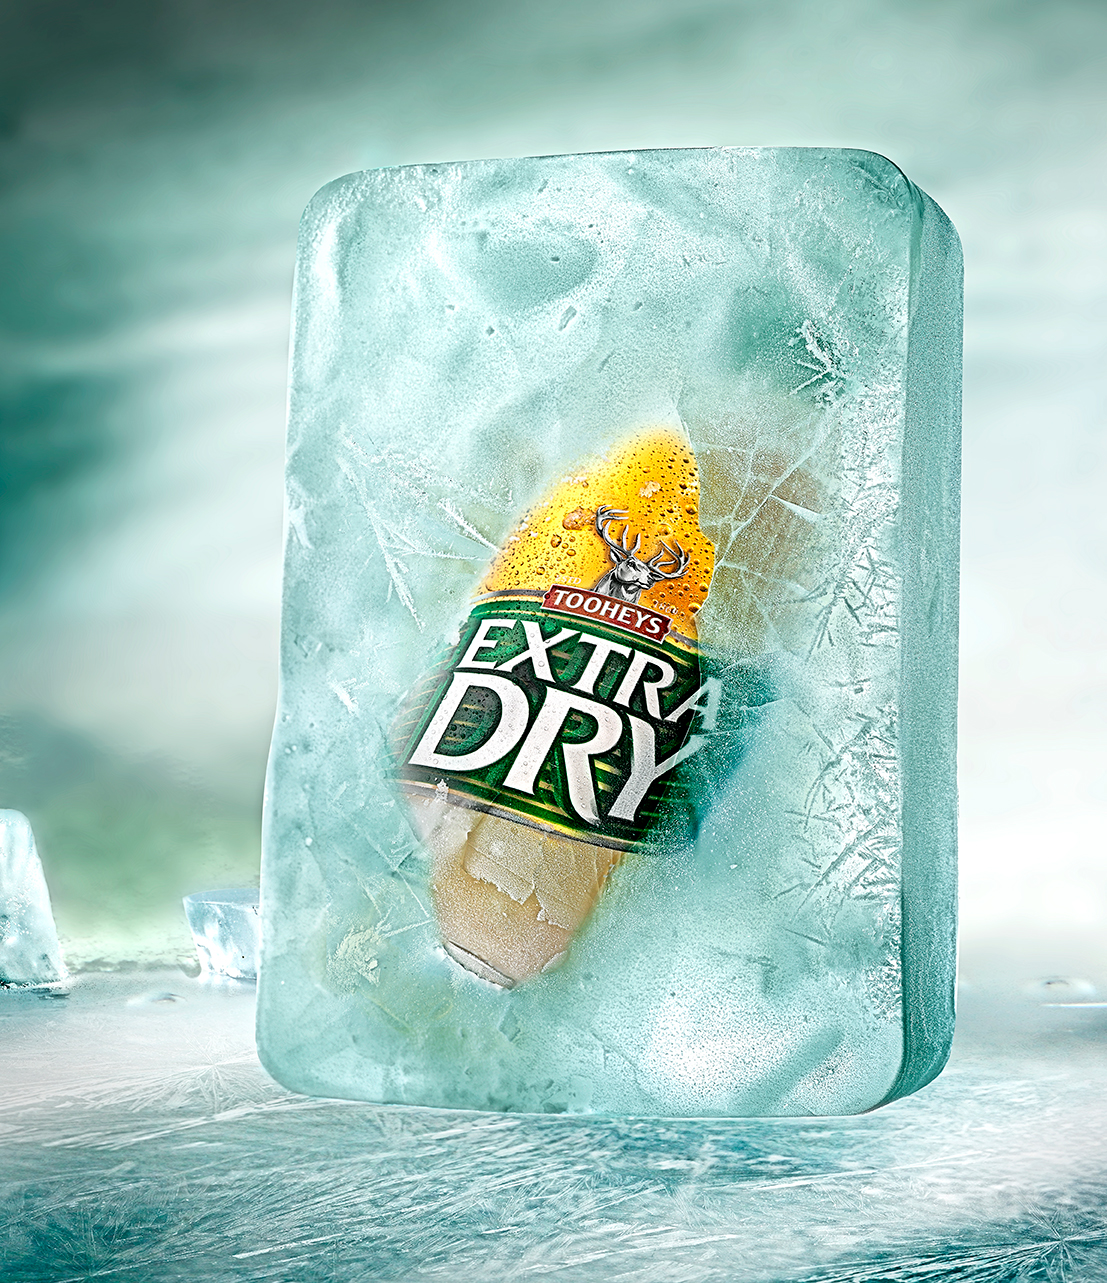 Energi Packaging Design Agency Specialists Product Lifestyle Photography Tooheys Extra Dry Beer Bottle Ice Frozen Refreshing Crisp 